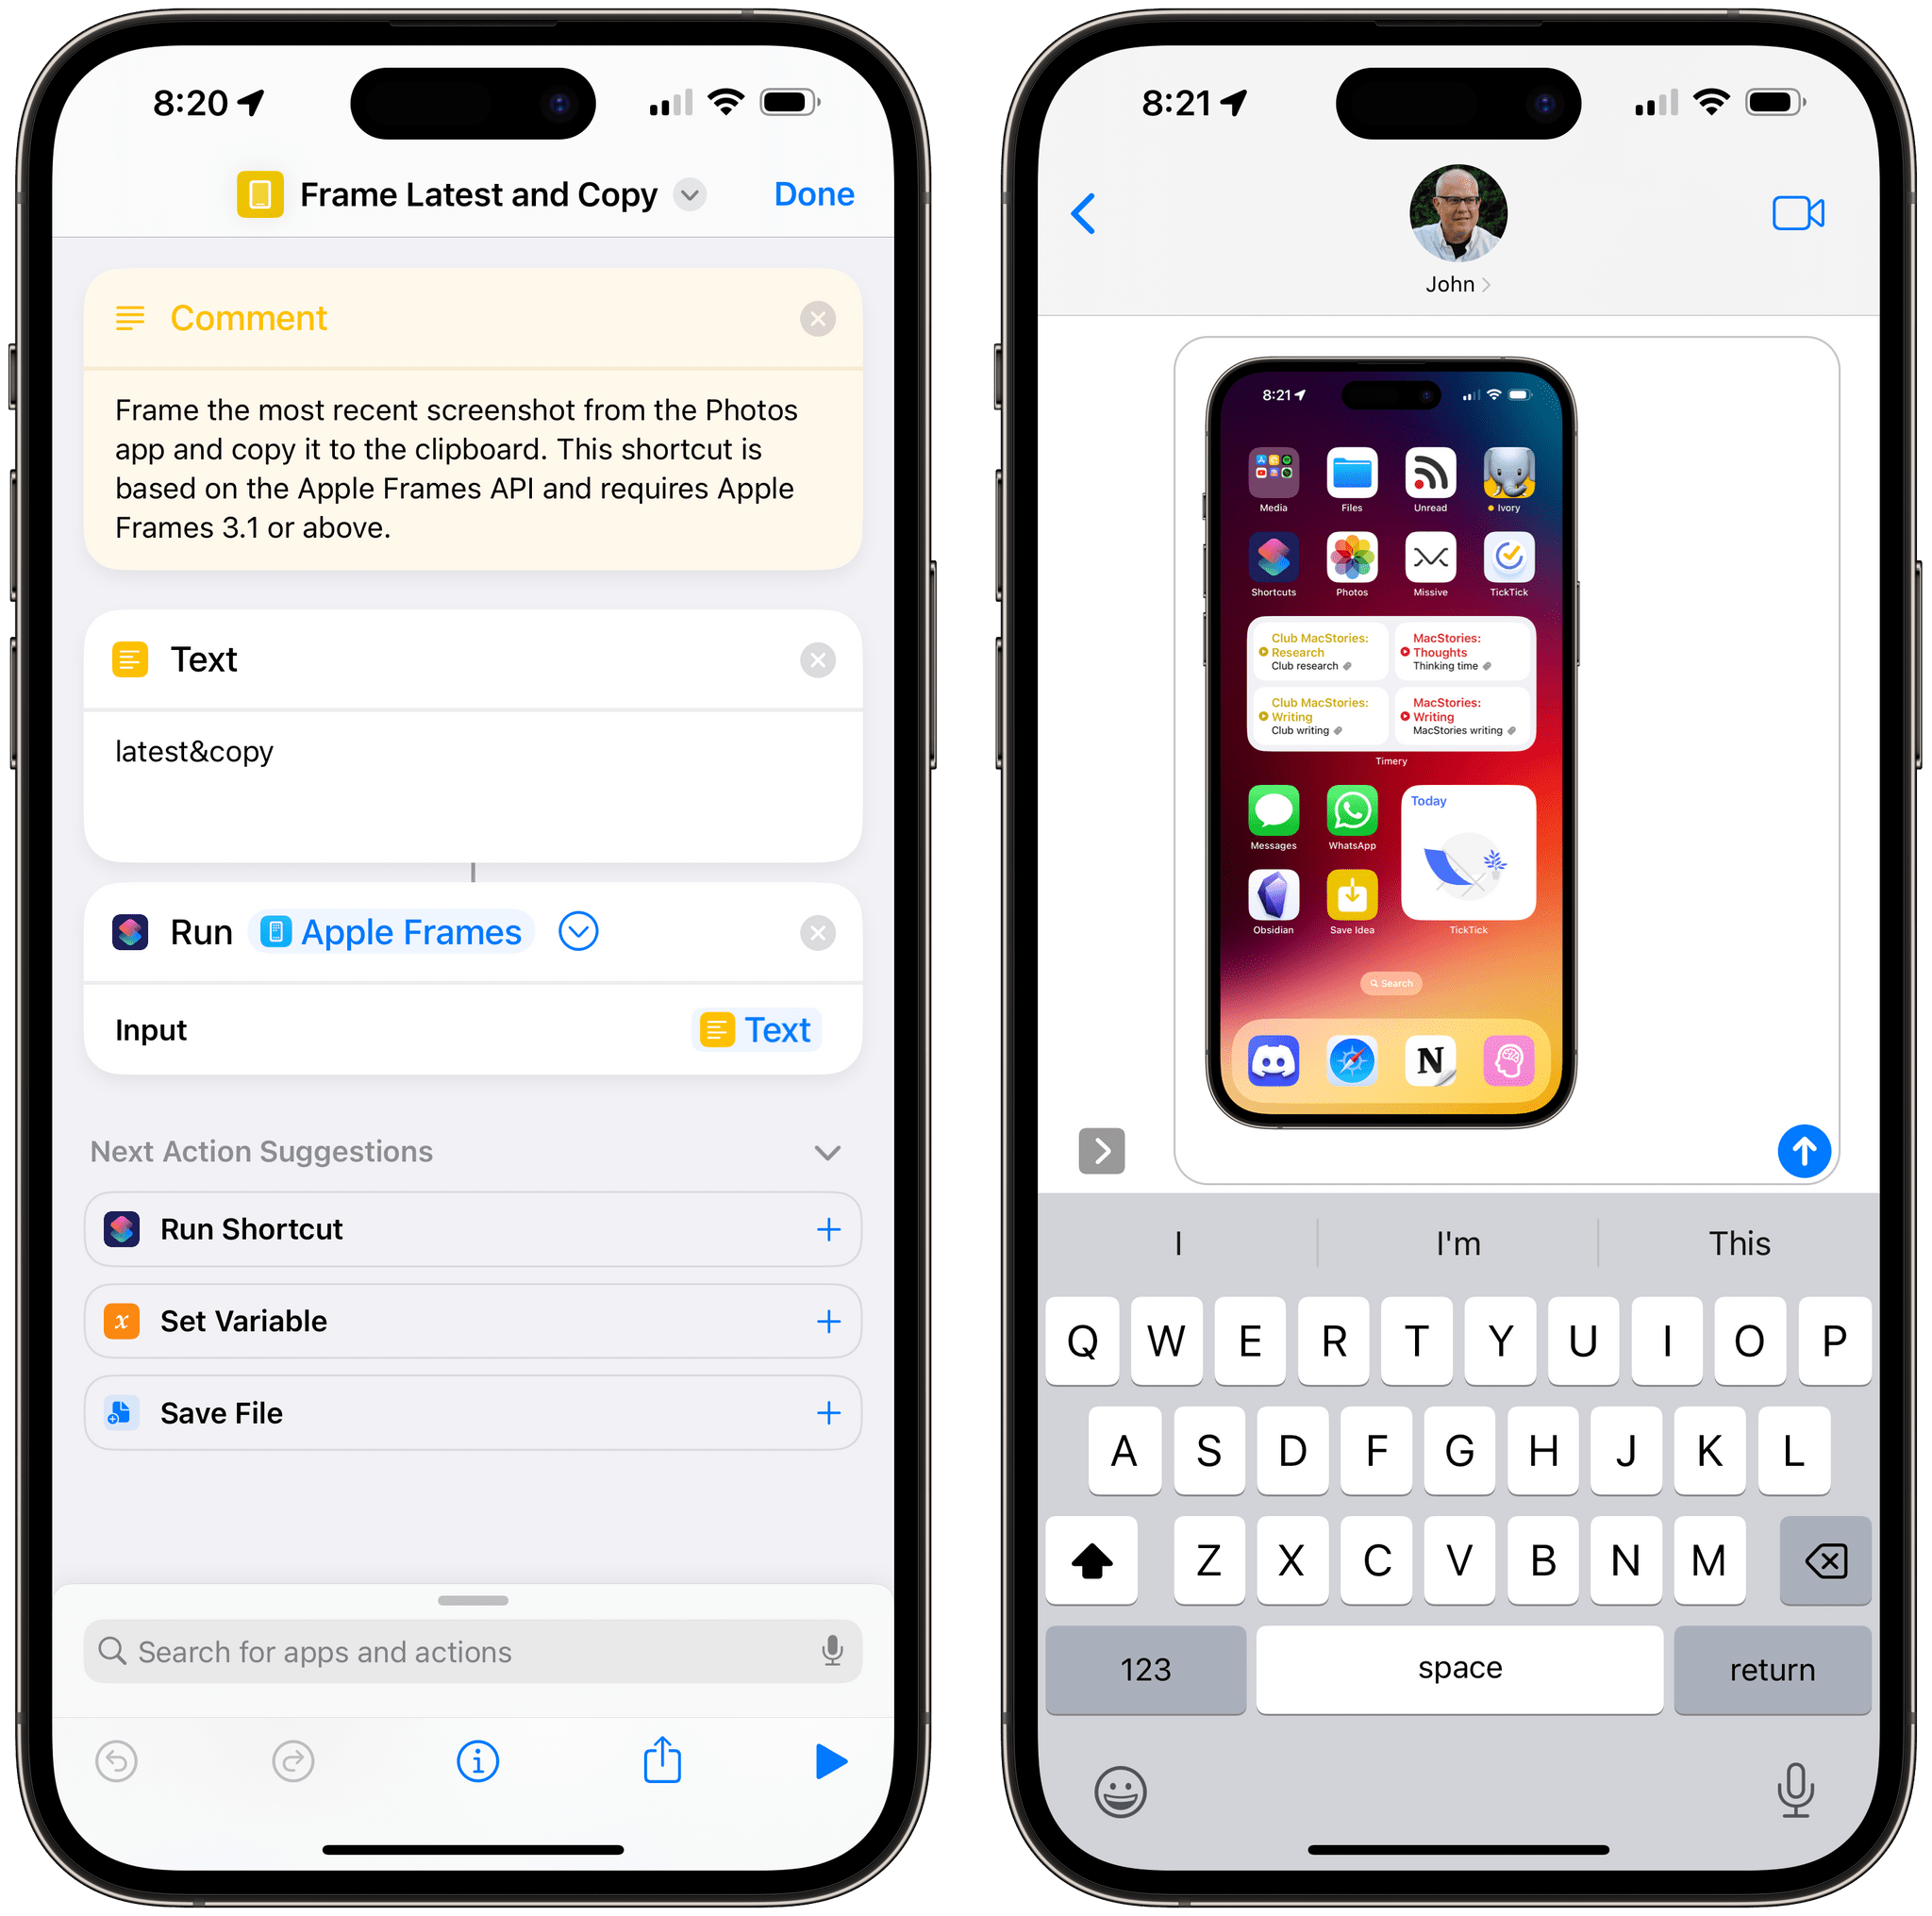 Framing the latest screenshot I've taken with this helper shortcut so I can quickly paste it in iMessage.